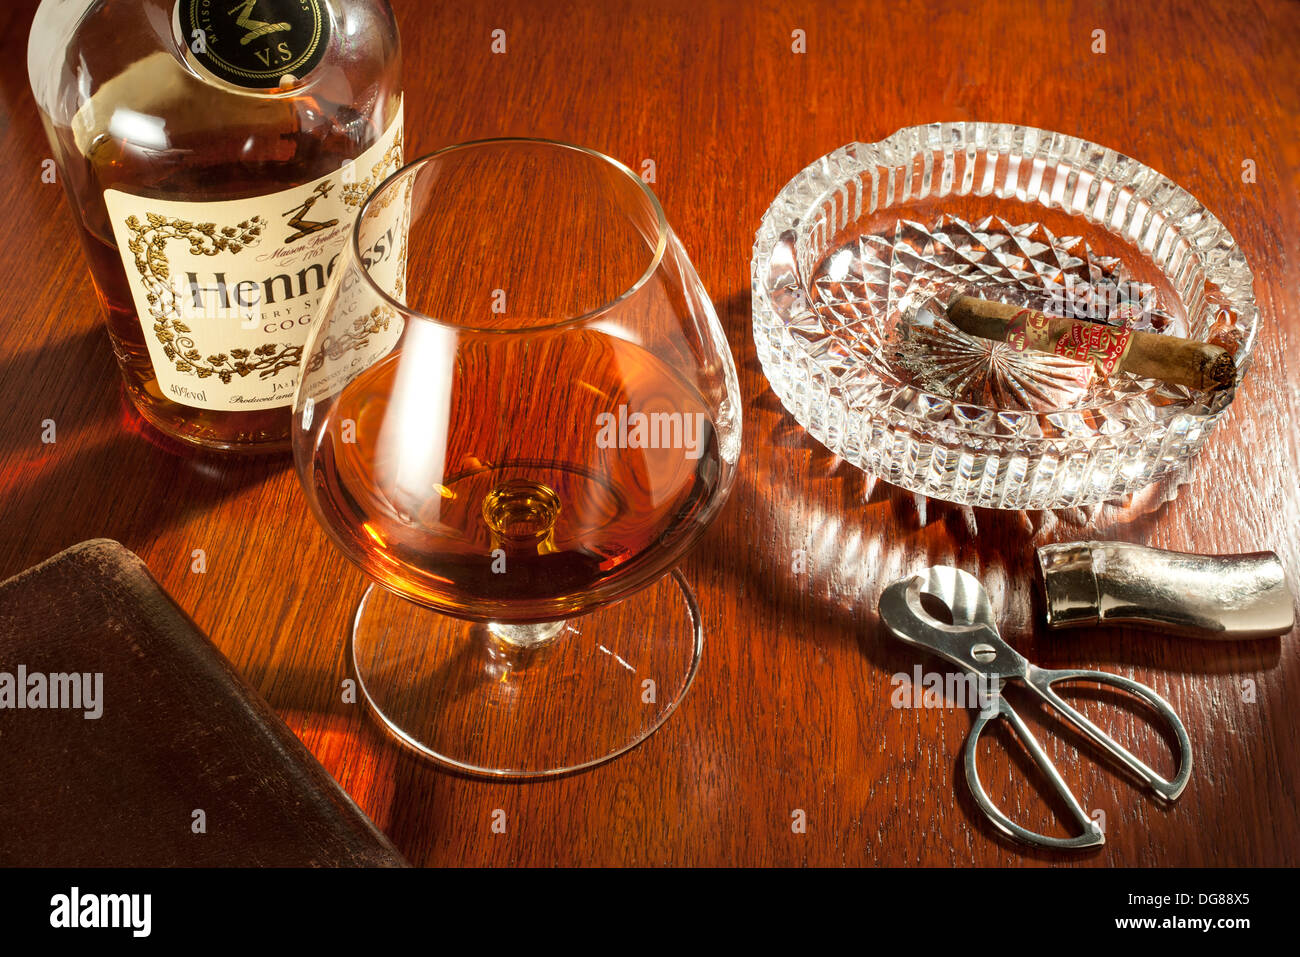 Brandy and cigars - A snifter glass of Hennessy brandy with a part smoked cigar in ashtray Stock Photo